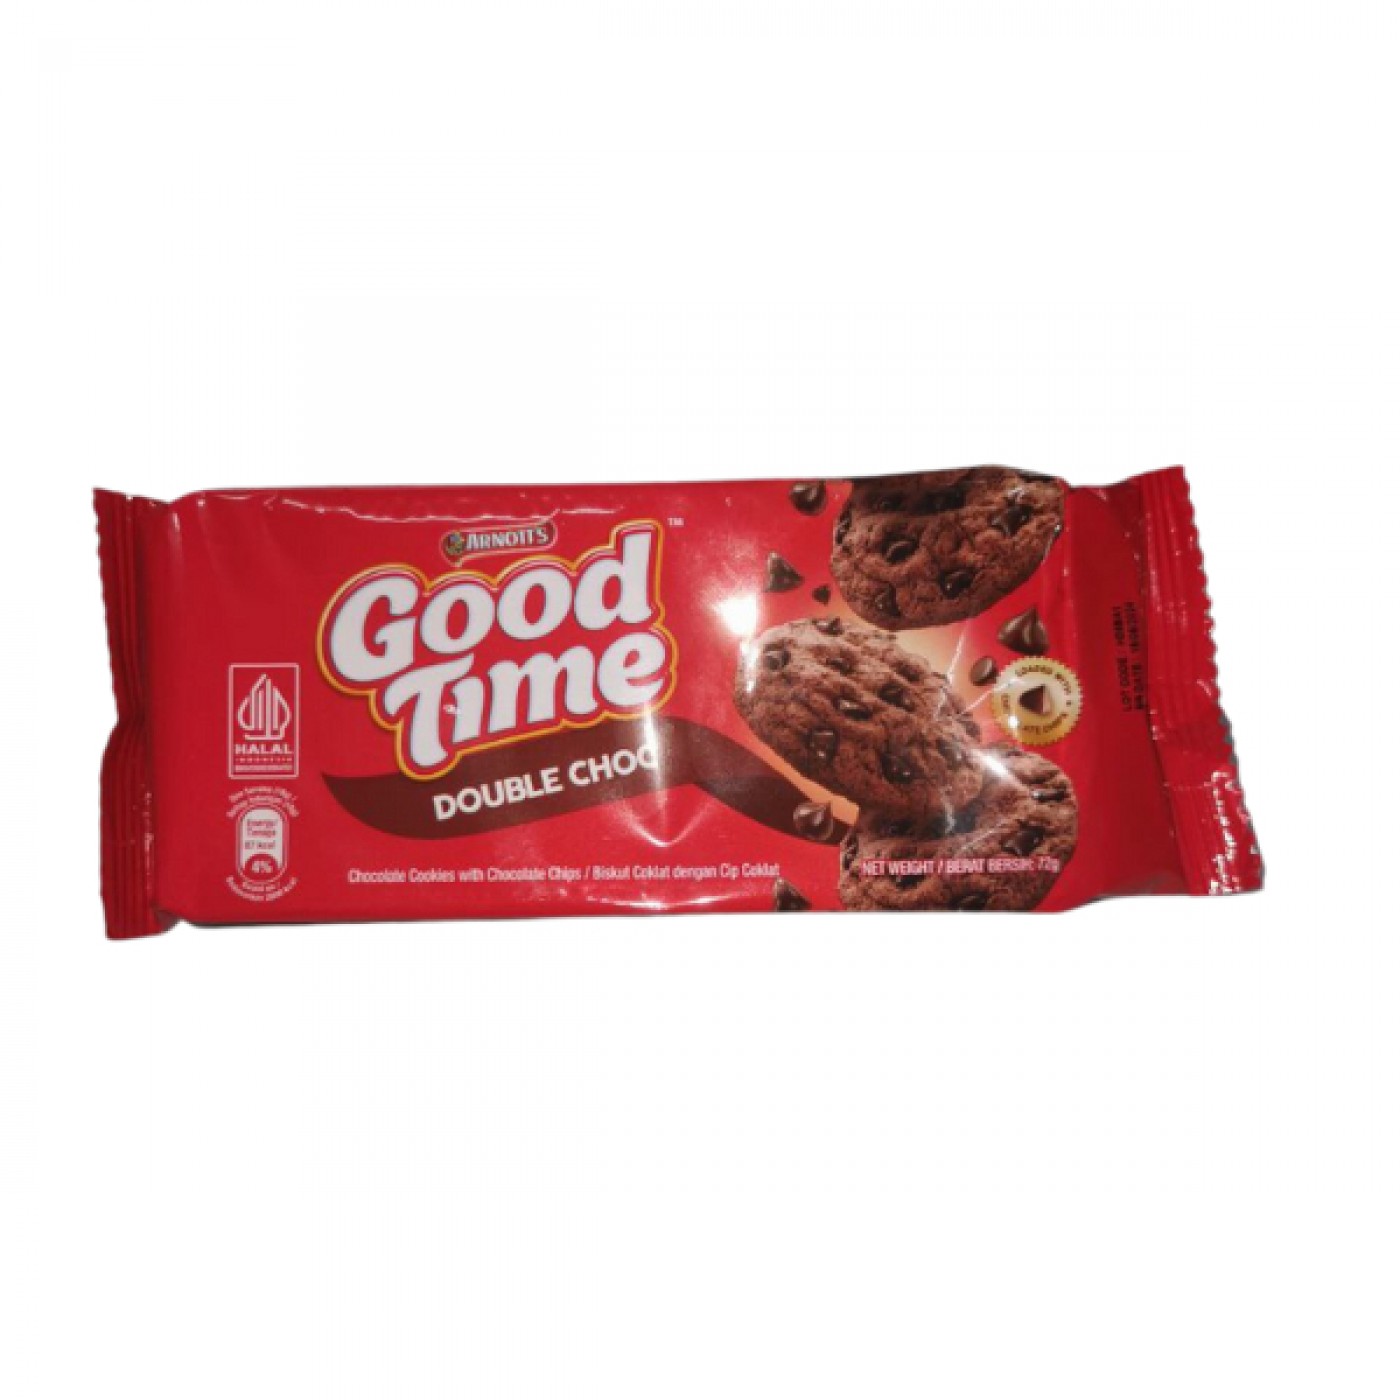 GOOD TIME DOUBLE CHOCOCHIPS COOKIES 72G